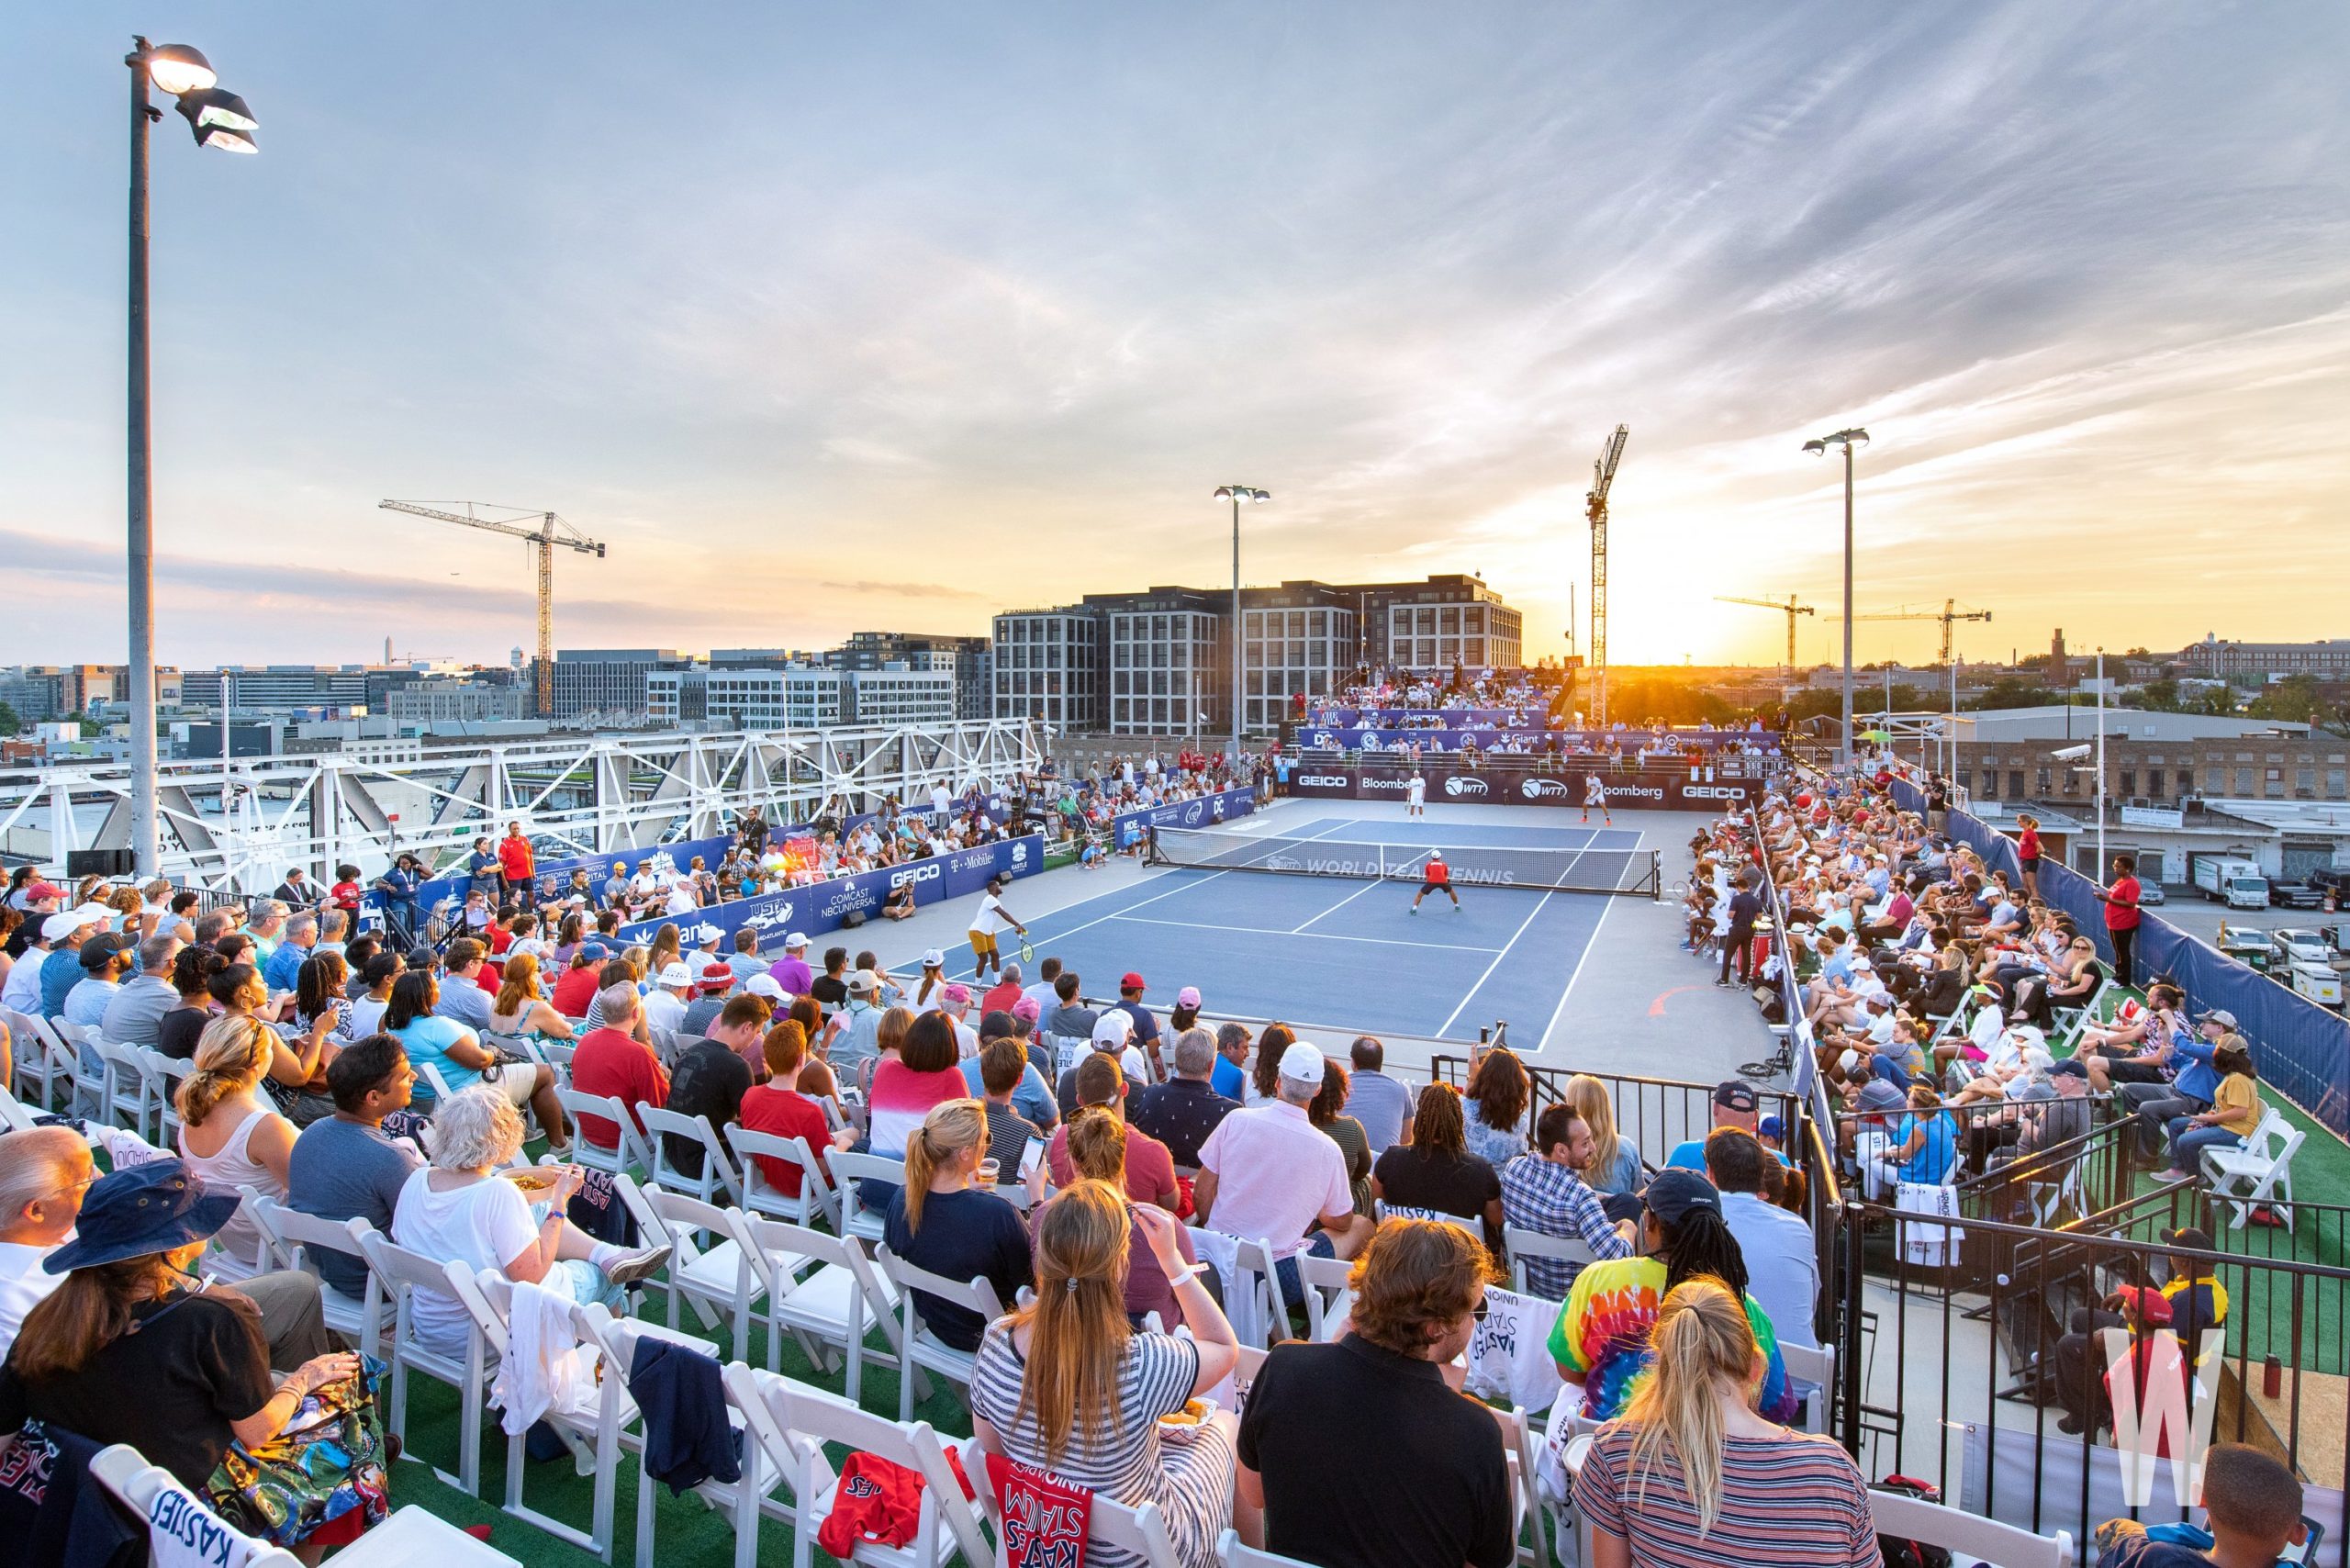 Here's What It's Like to Watch Tennis on Union Market's Roof - Washingtonian